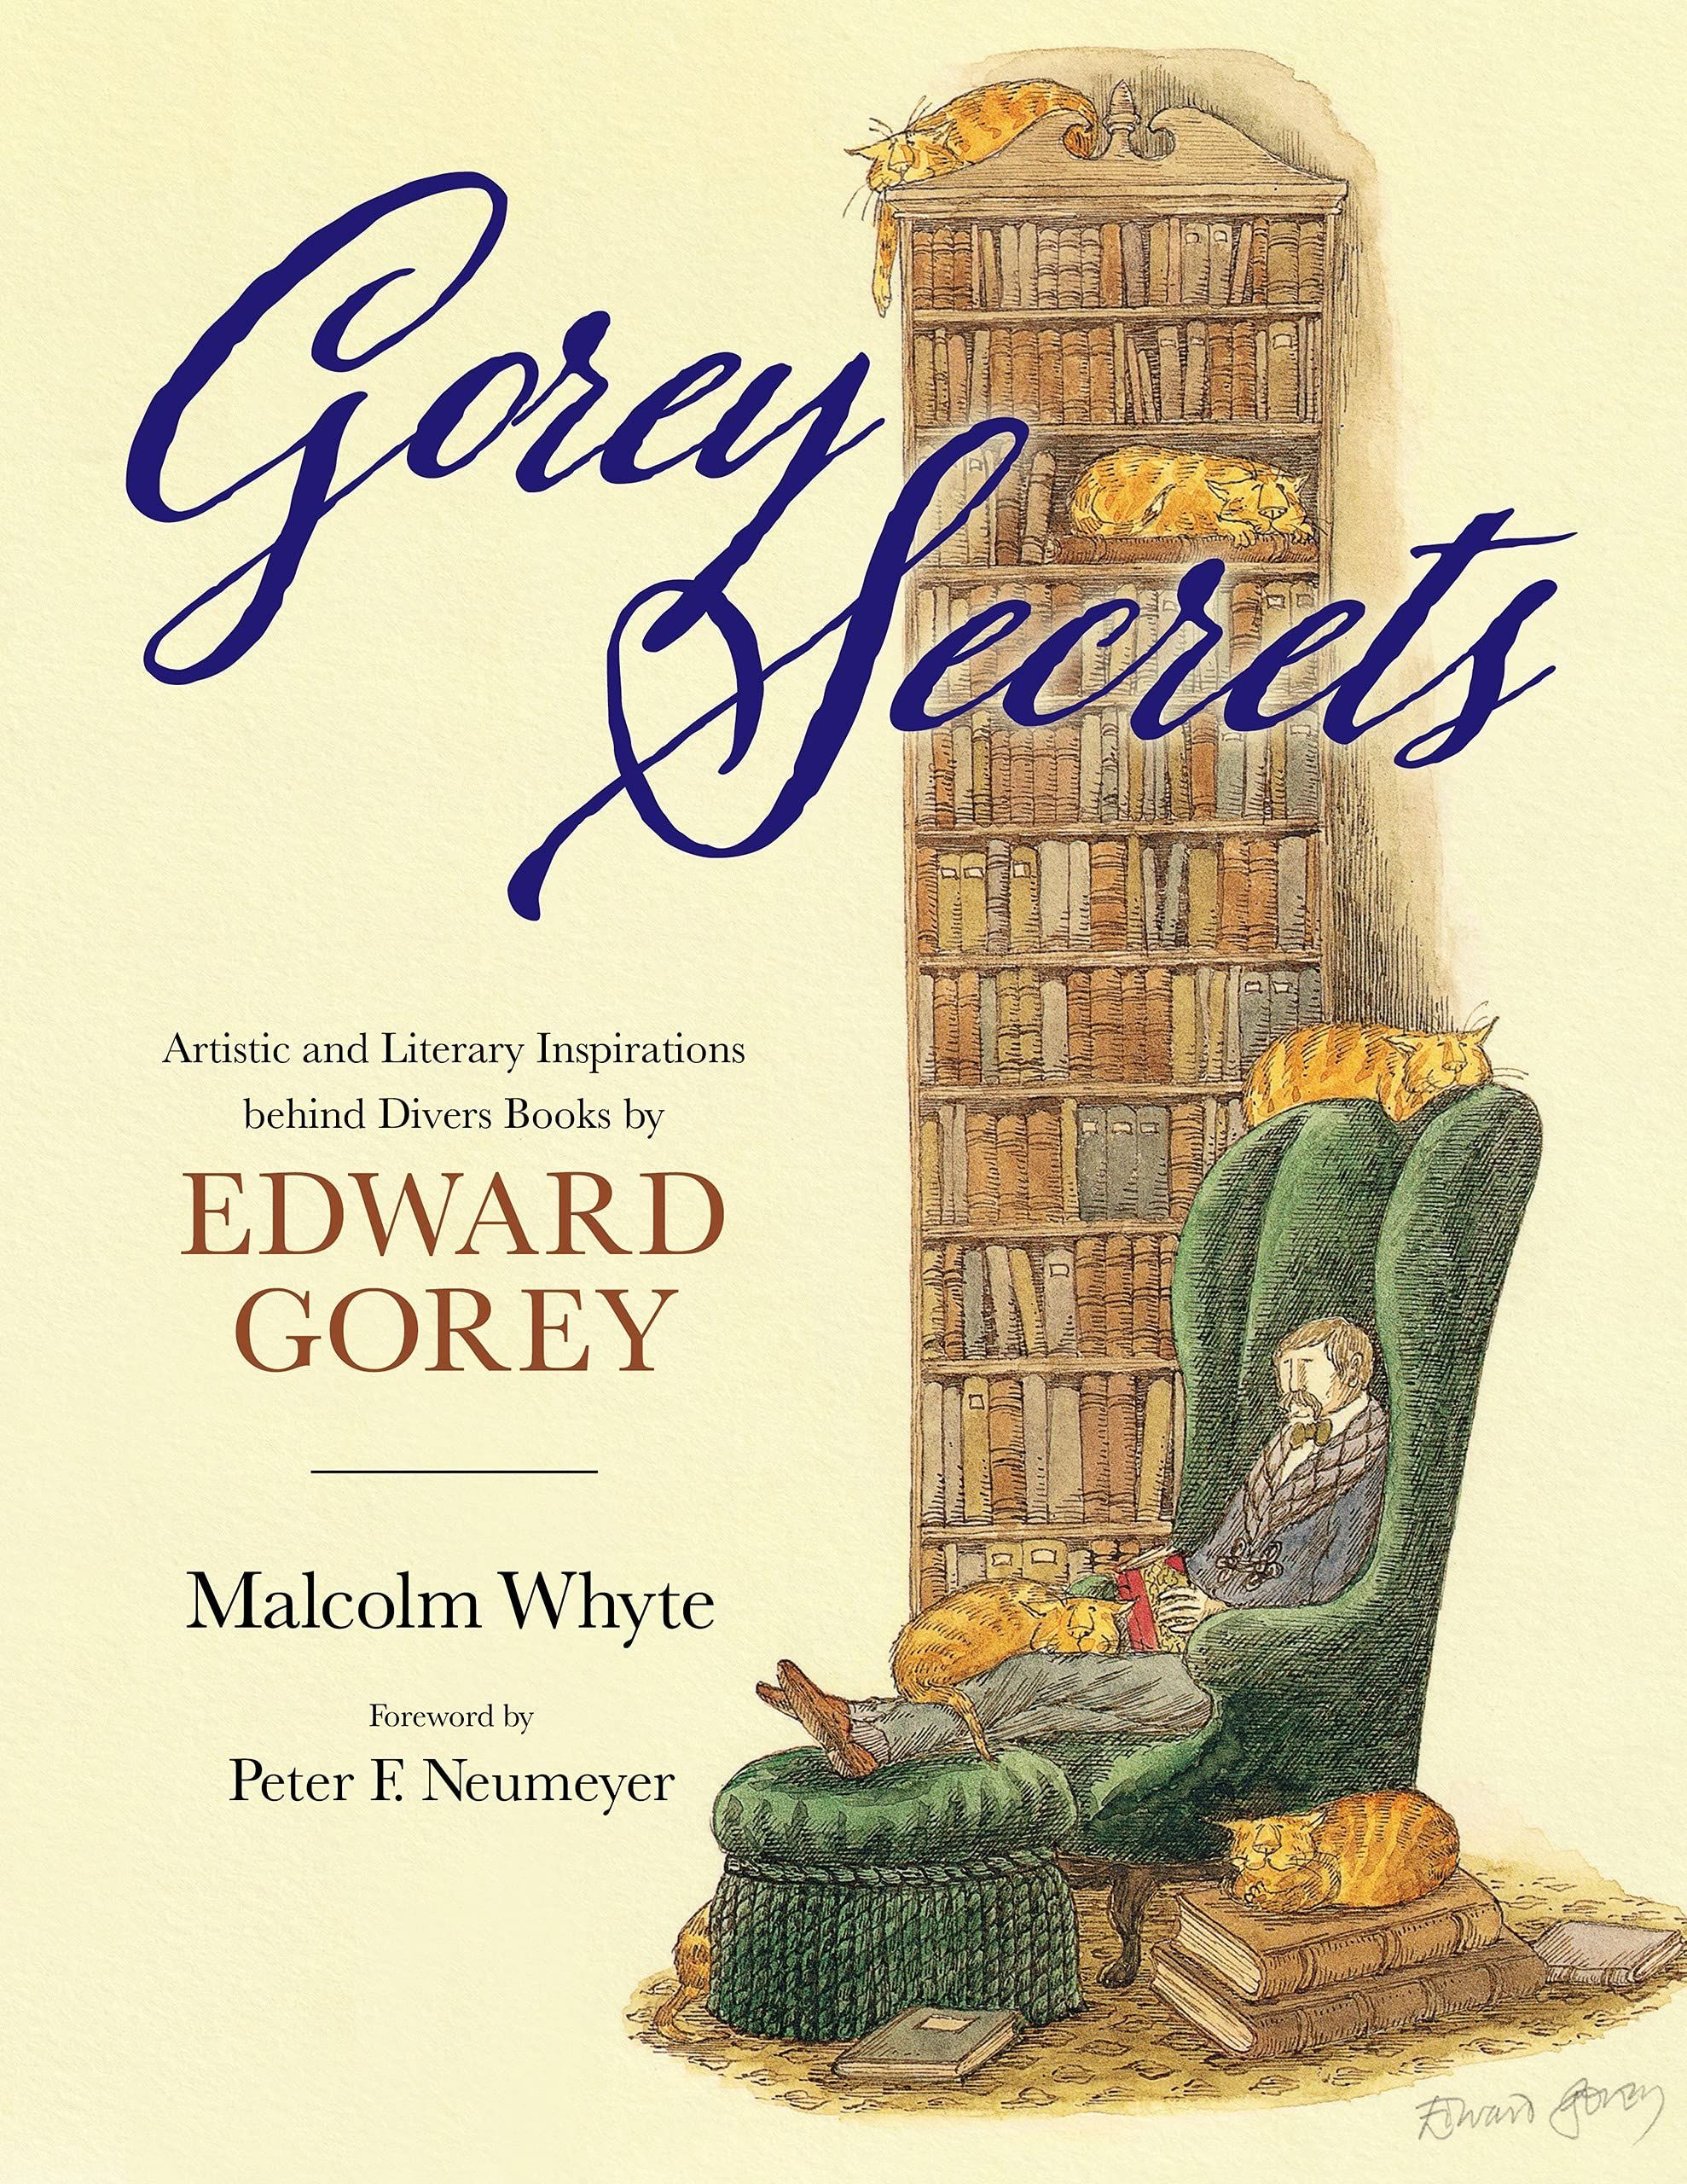 Dashing Expectations: On Malcolm Whyte’s “Gorey Secrets” and Nathalie Tierce’s “Pulling Weeds from a Cactus Garden”